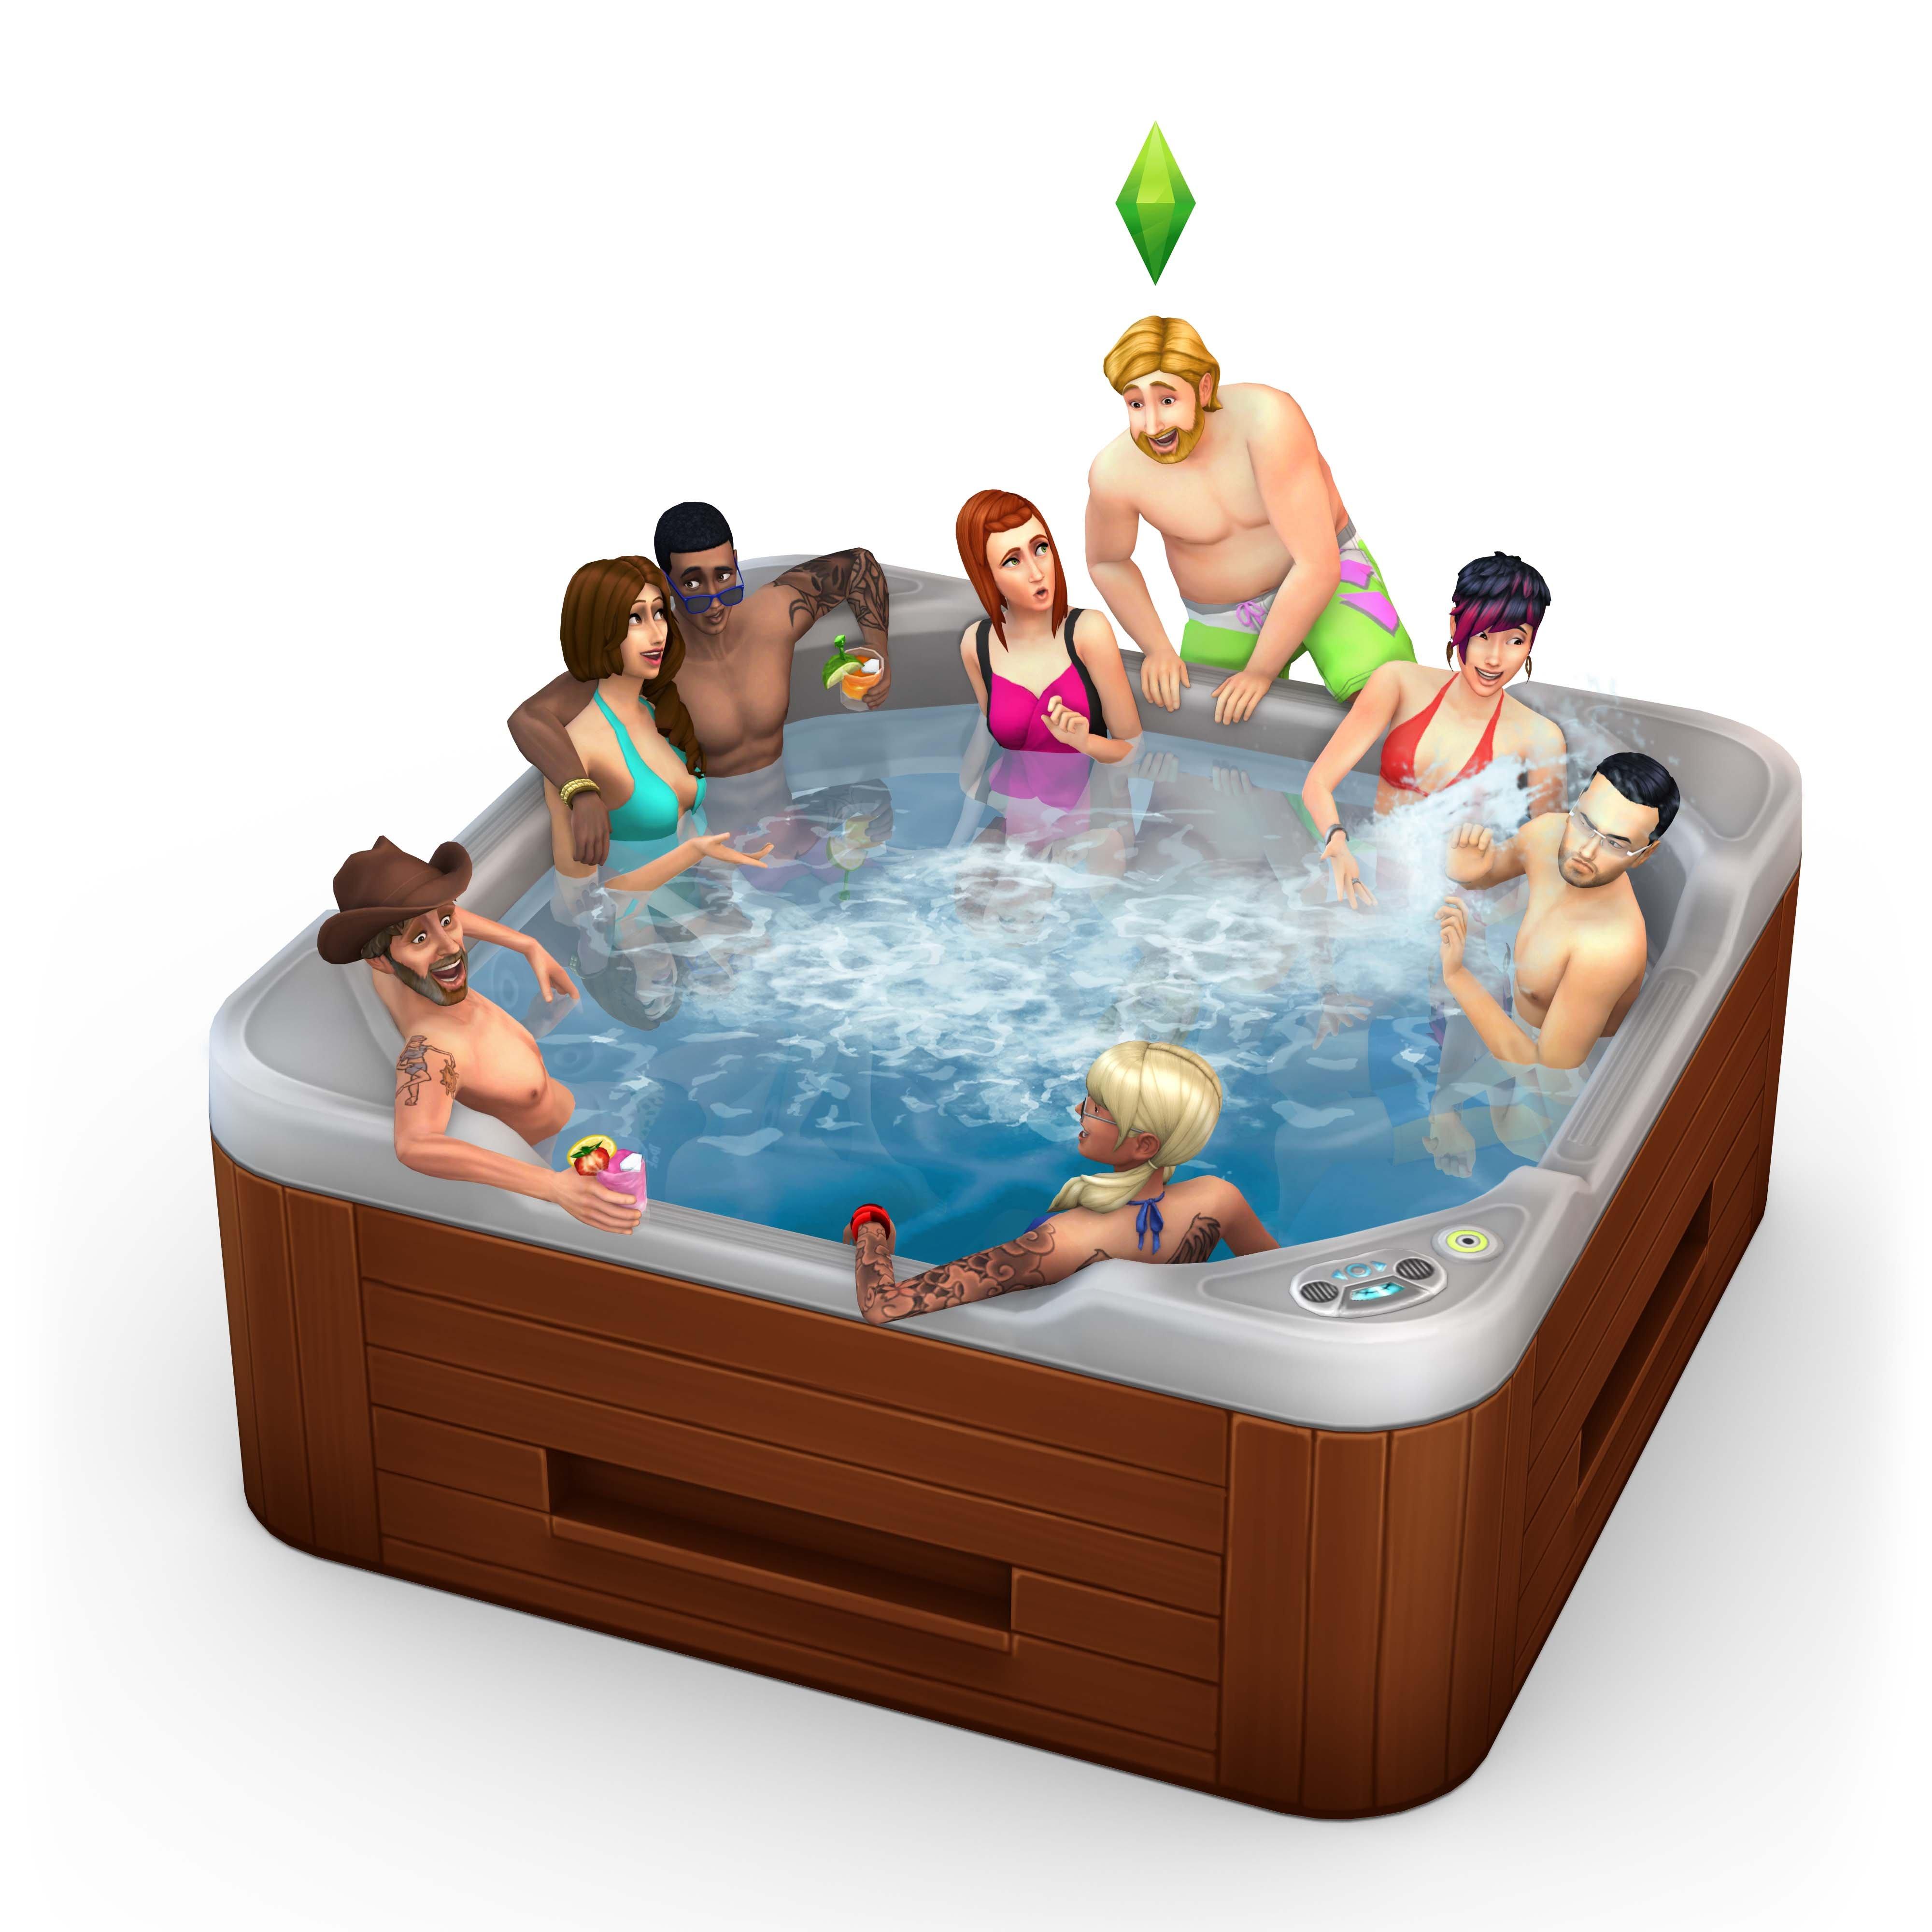 list item 2 of 4 The Sims 4: Perfect Patio Stuff